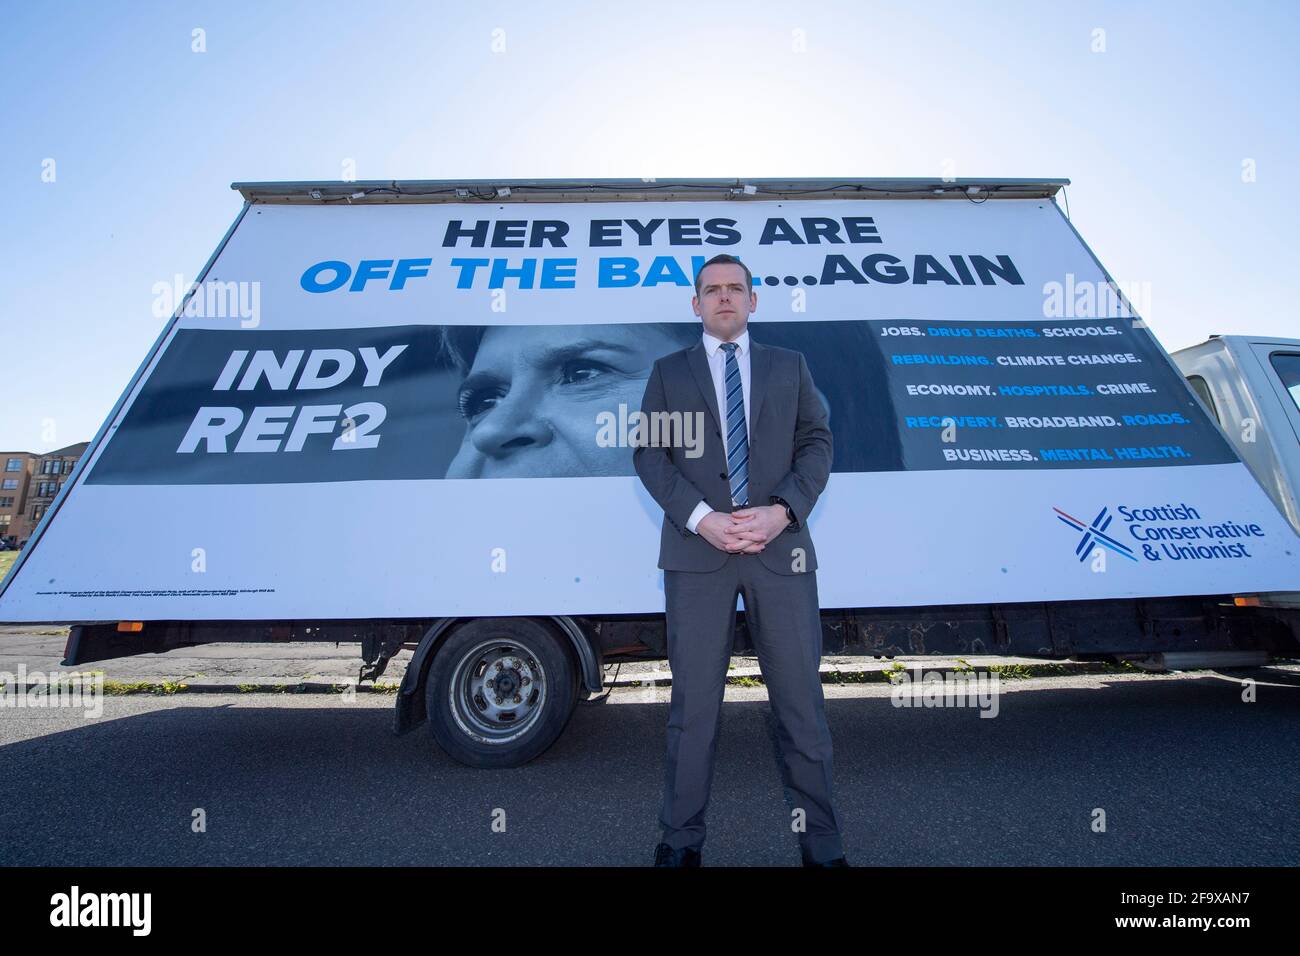 Glasgow, Scotland, UK. 21st Apr, 2021. PICTURED: Douglas Ross MP launches an ad van campaign criticising Nicola Sturgeon's record in government. Credit: Colin Fisher/Alamy Live News Stock Photo